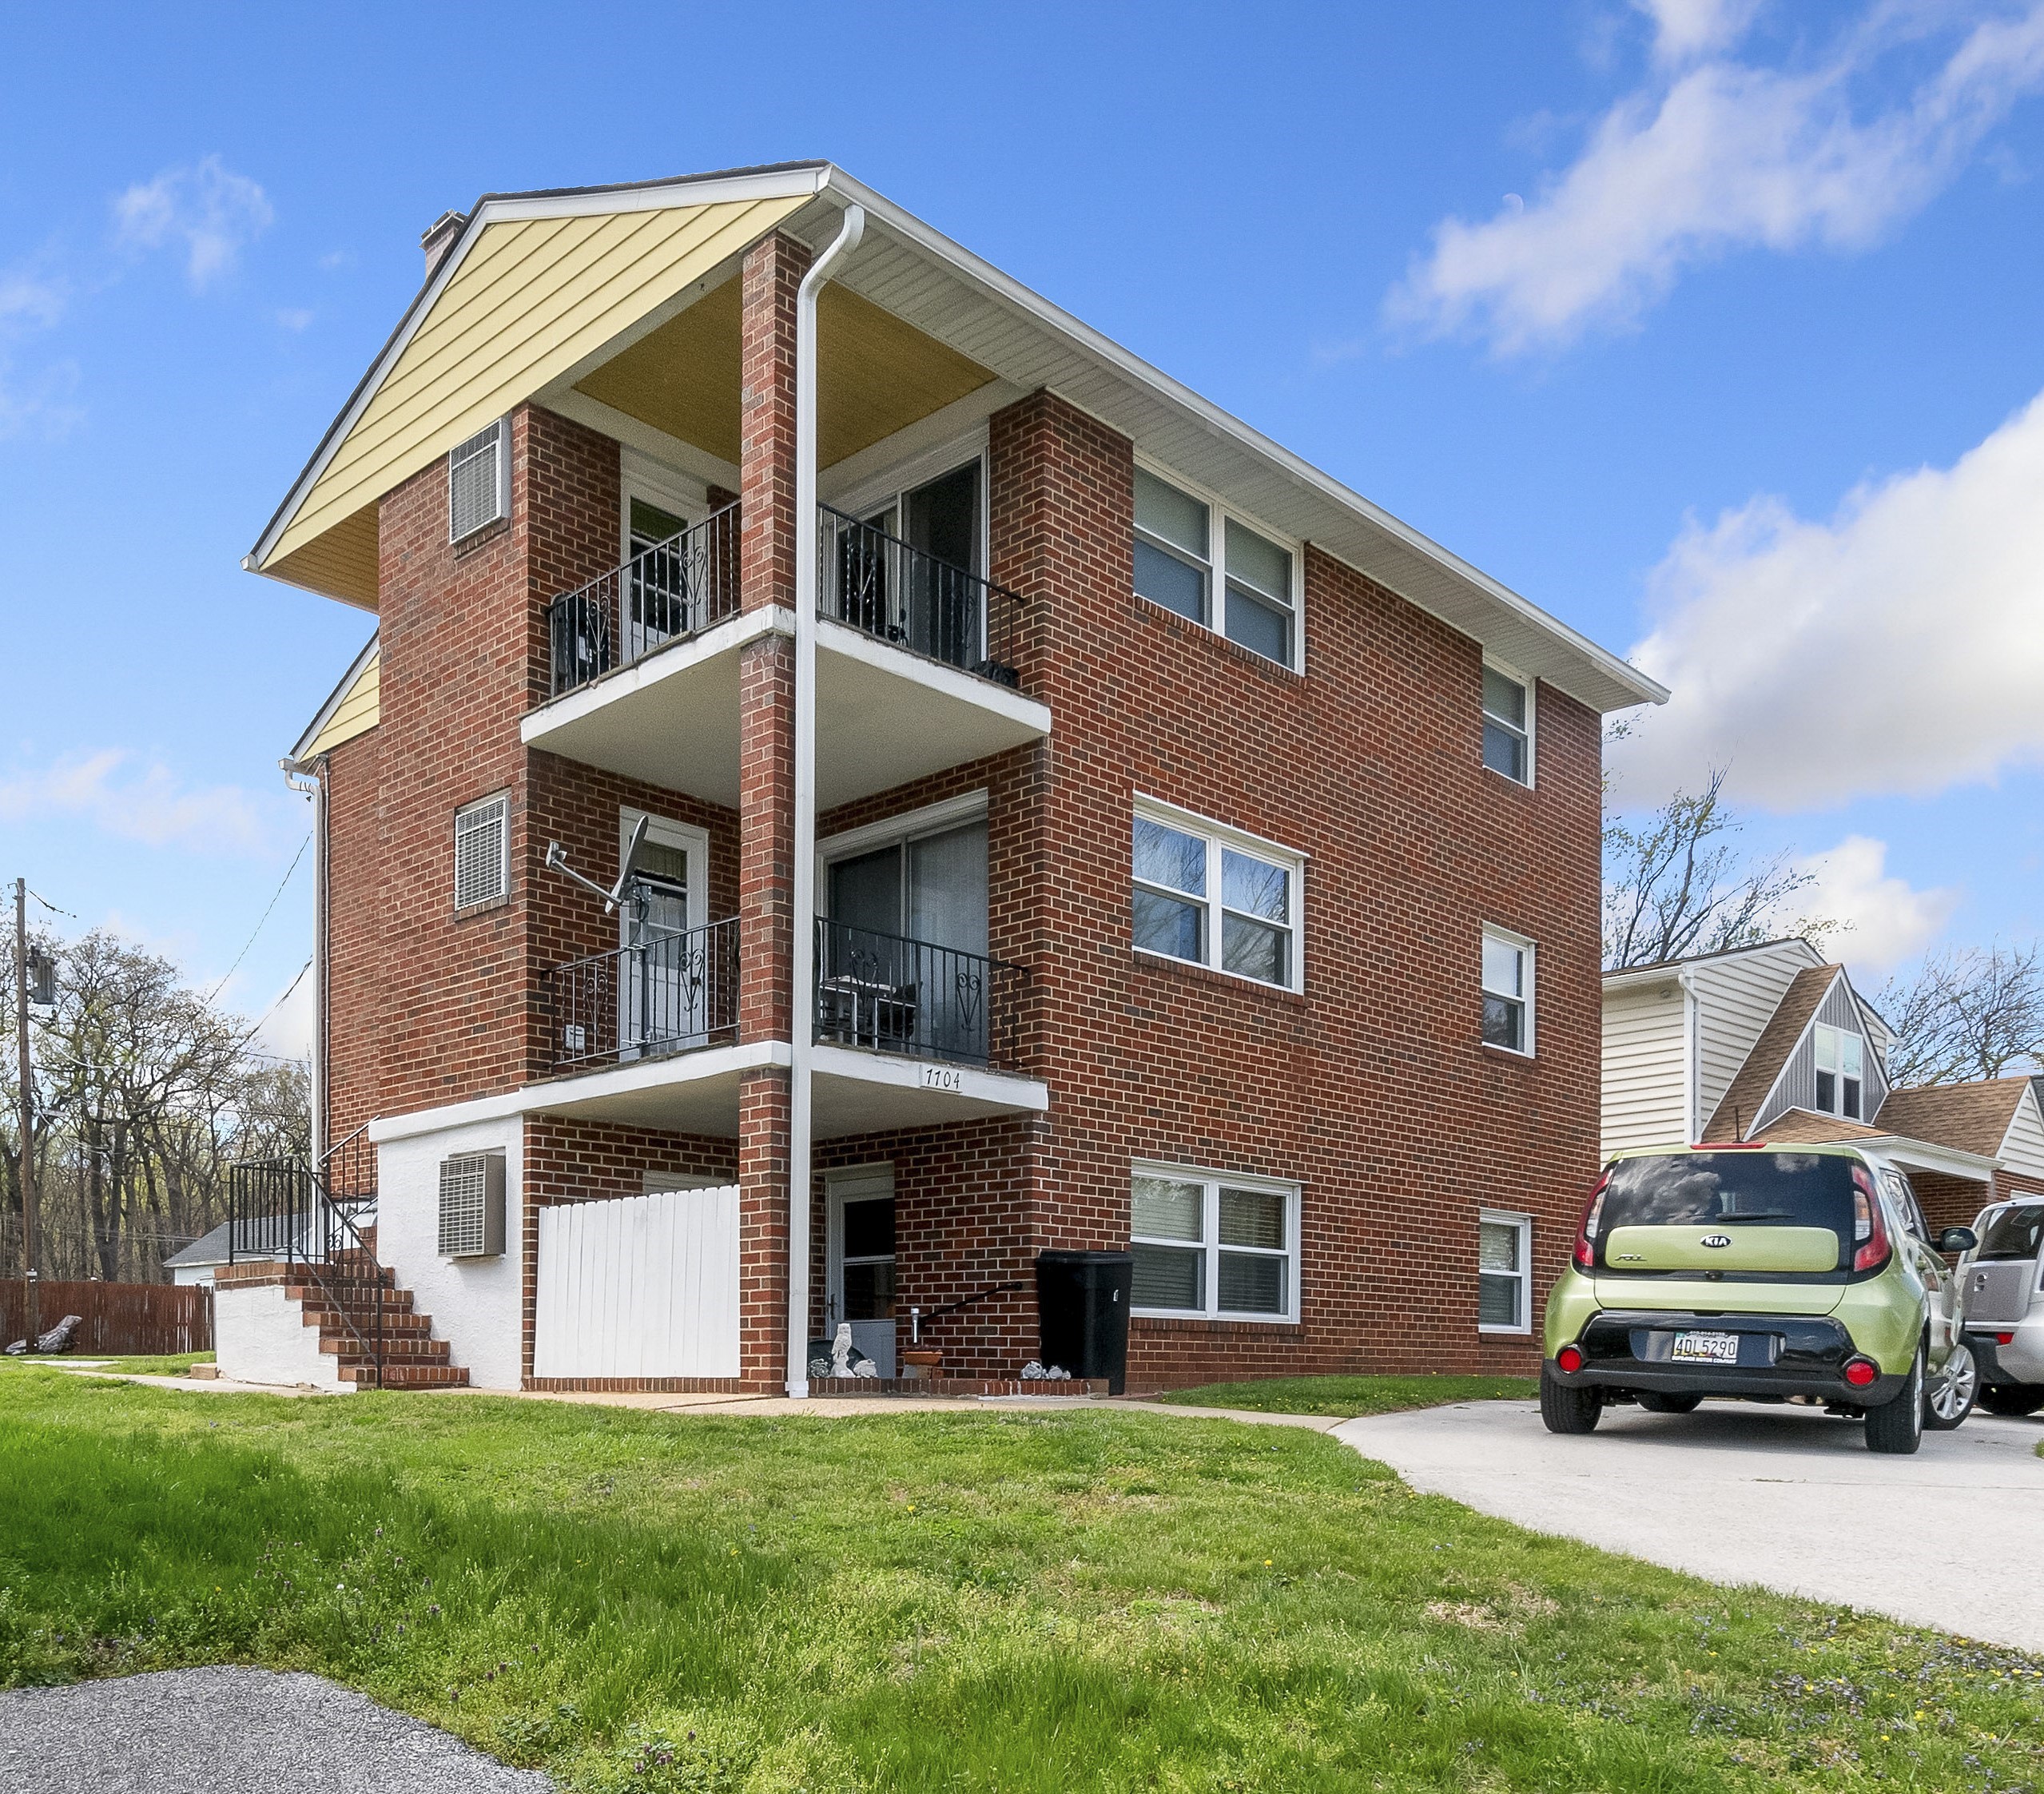 7704 Fredkert Avenue: 3 Apartments in Taylor Heights, 21236